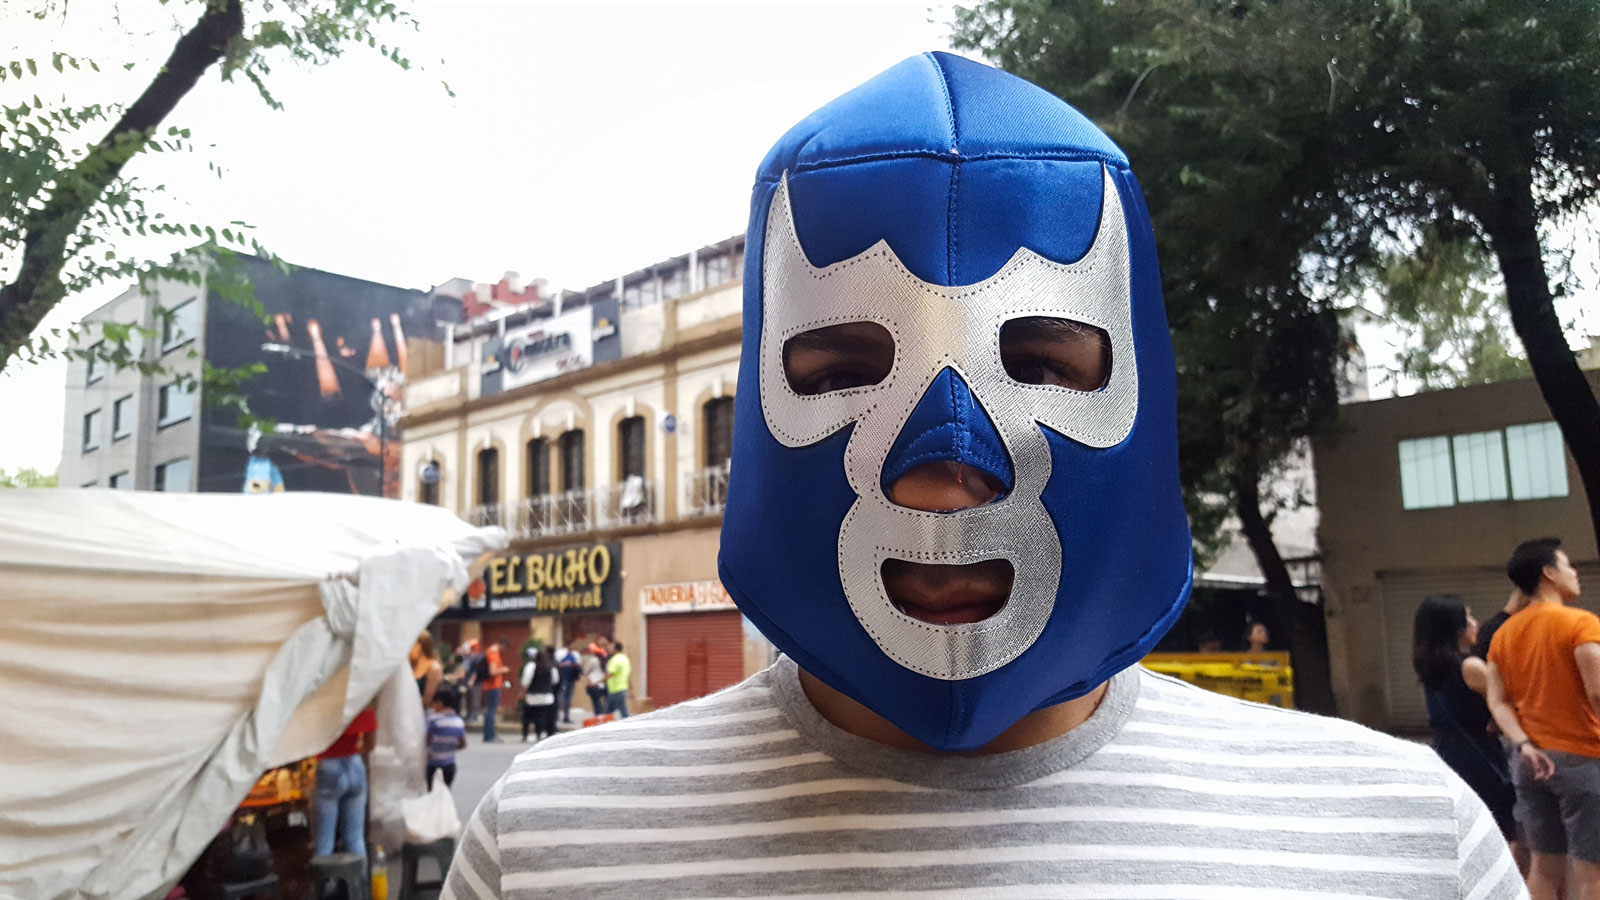 Michael at the Arena Mexico wearing a Luchador Mask of the Blue Demon